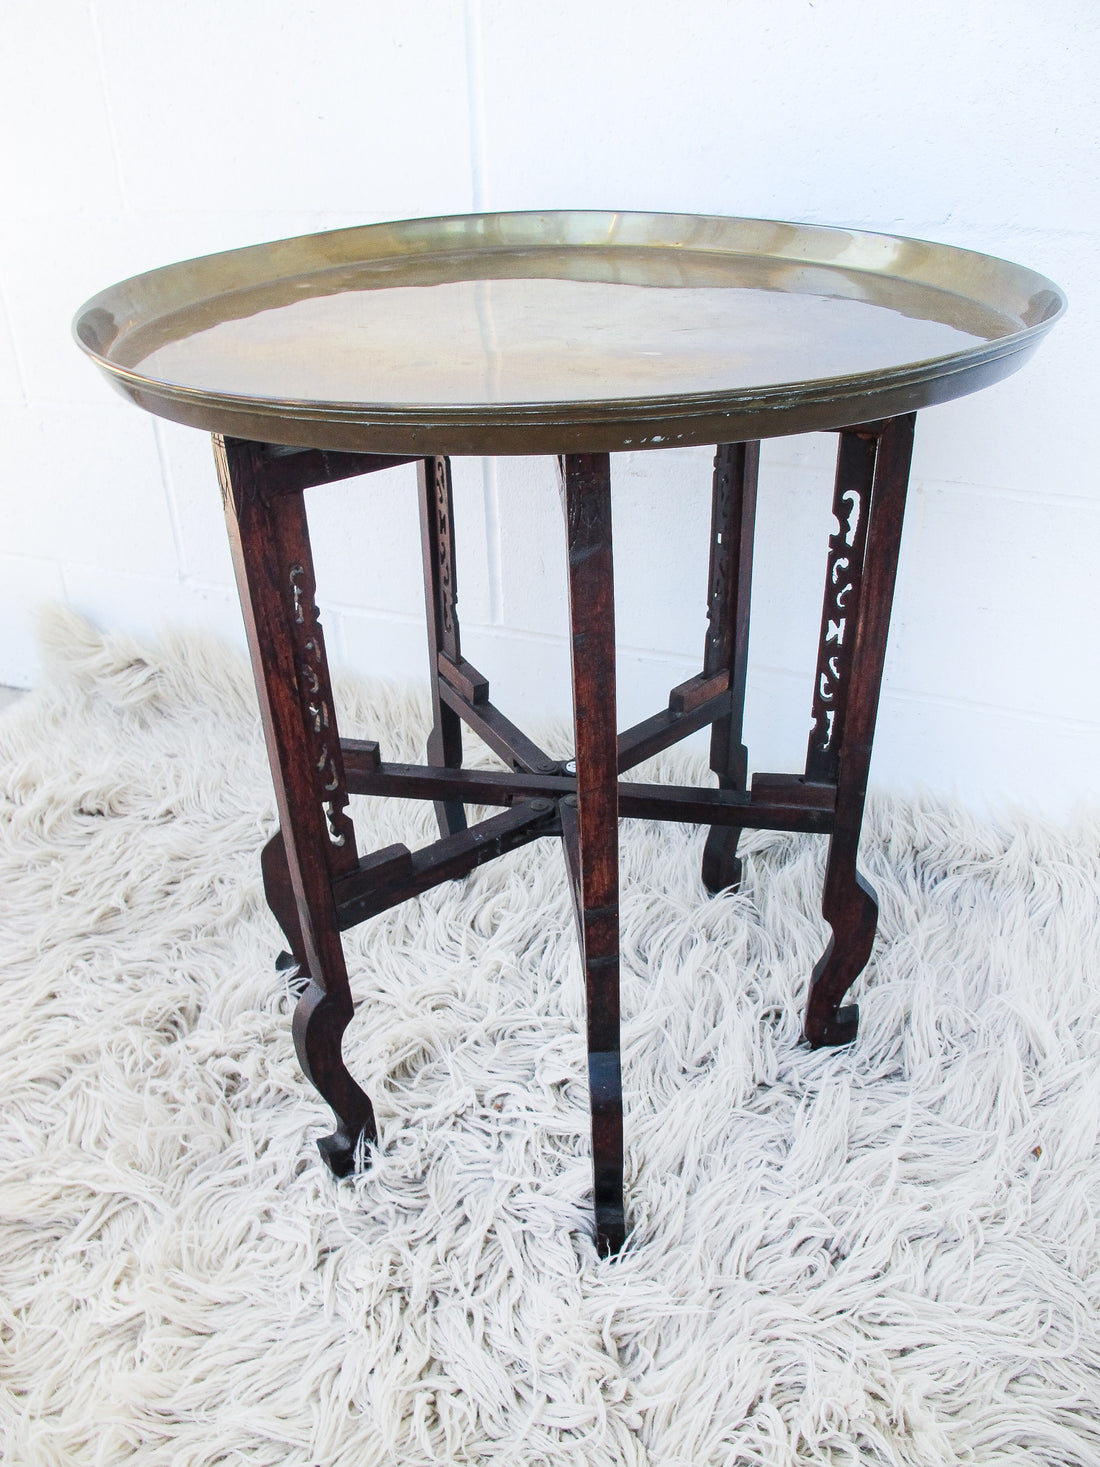 Antique Vintage Asian Brass Tray Table with Folding Base